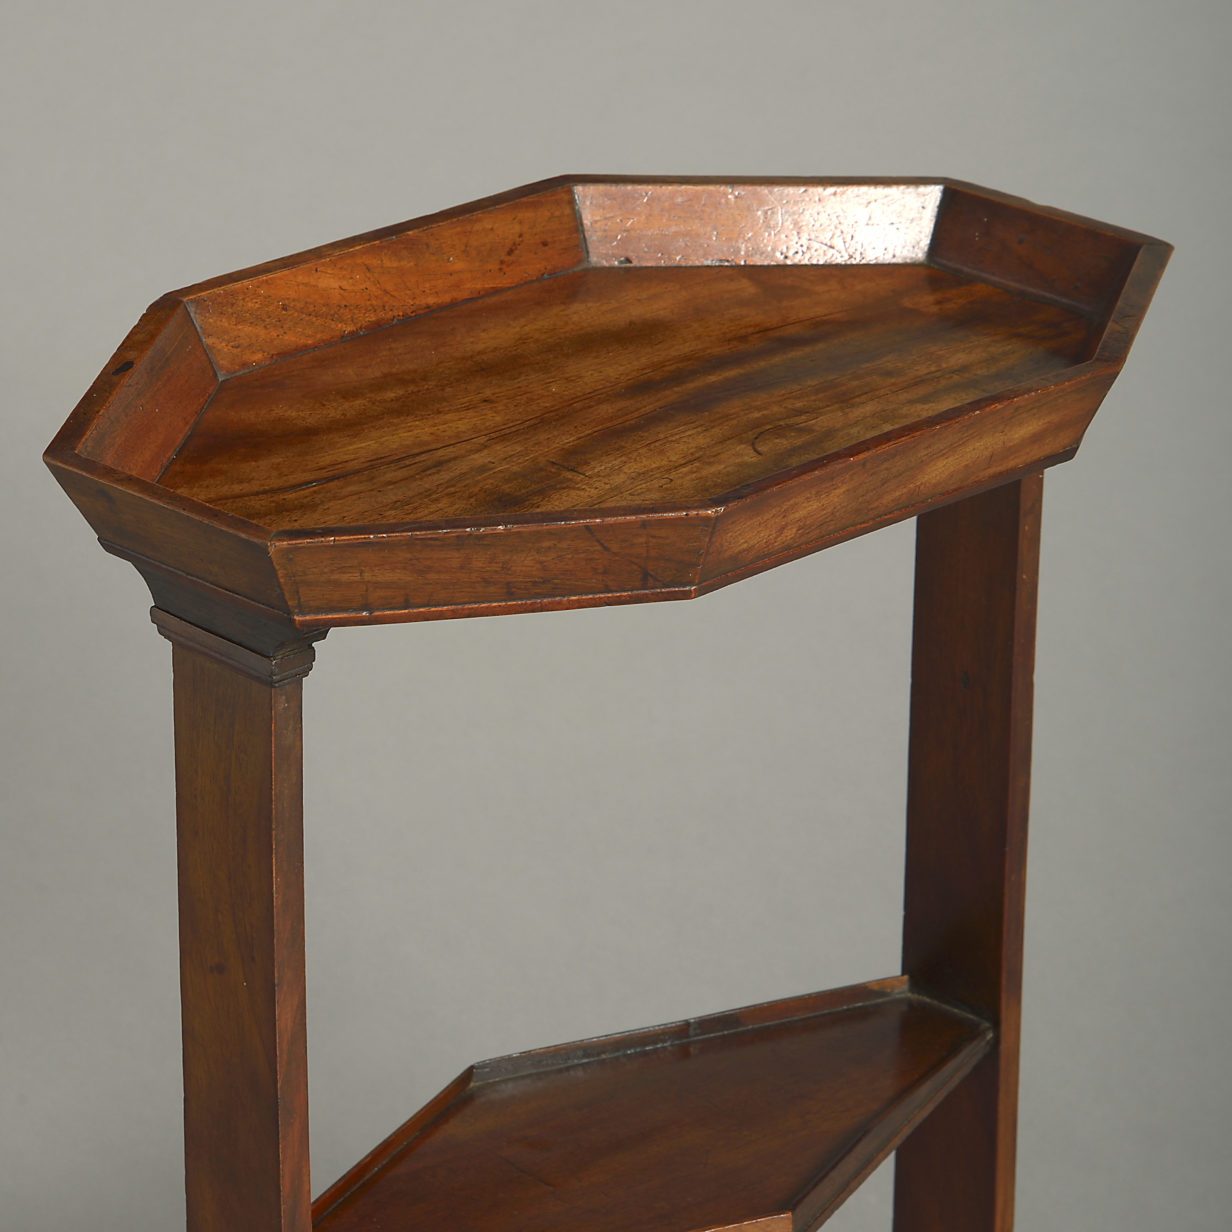 Late 18th century directoire period walnut table